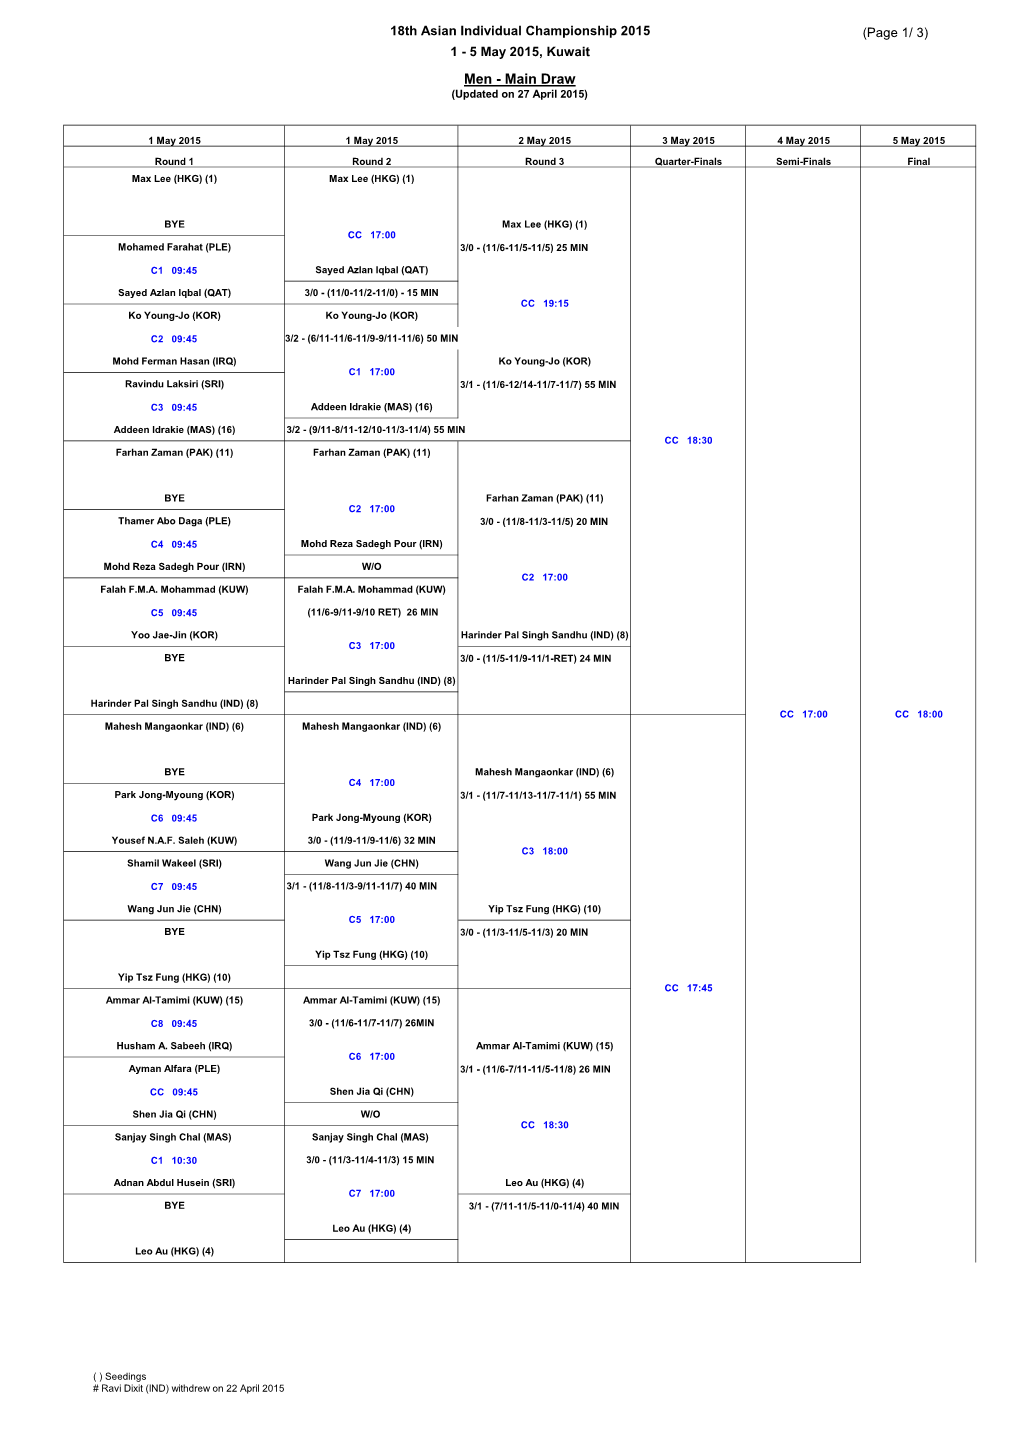 Men - Main Draw (Updated on 27 April 2015)